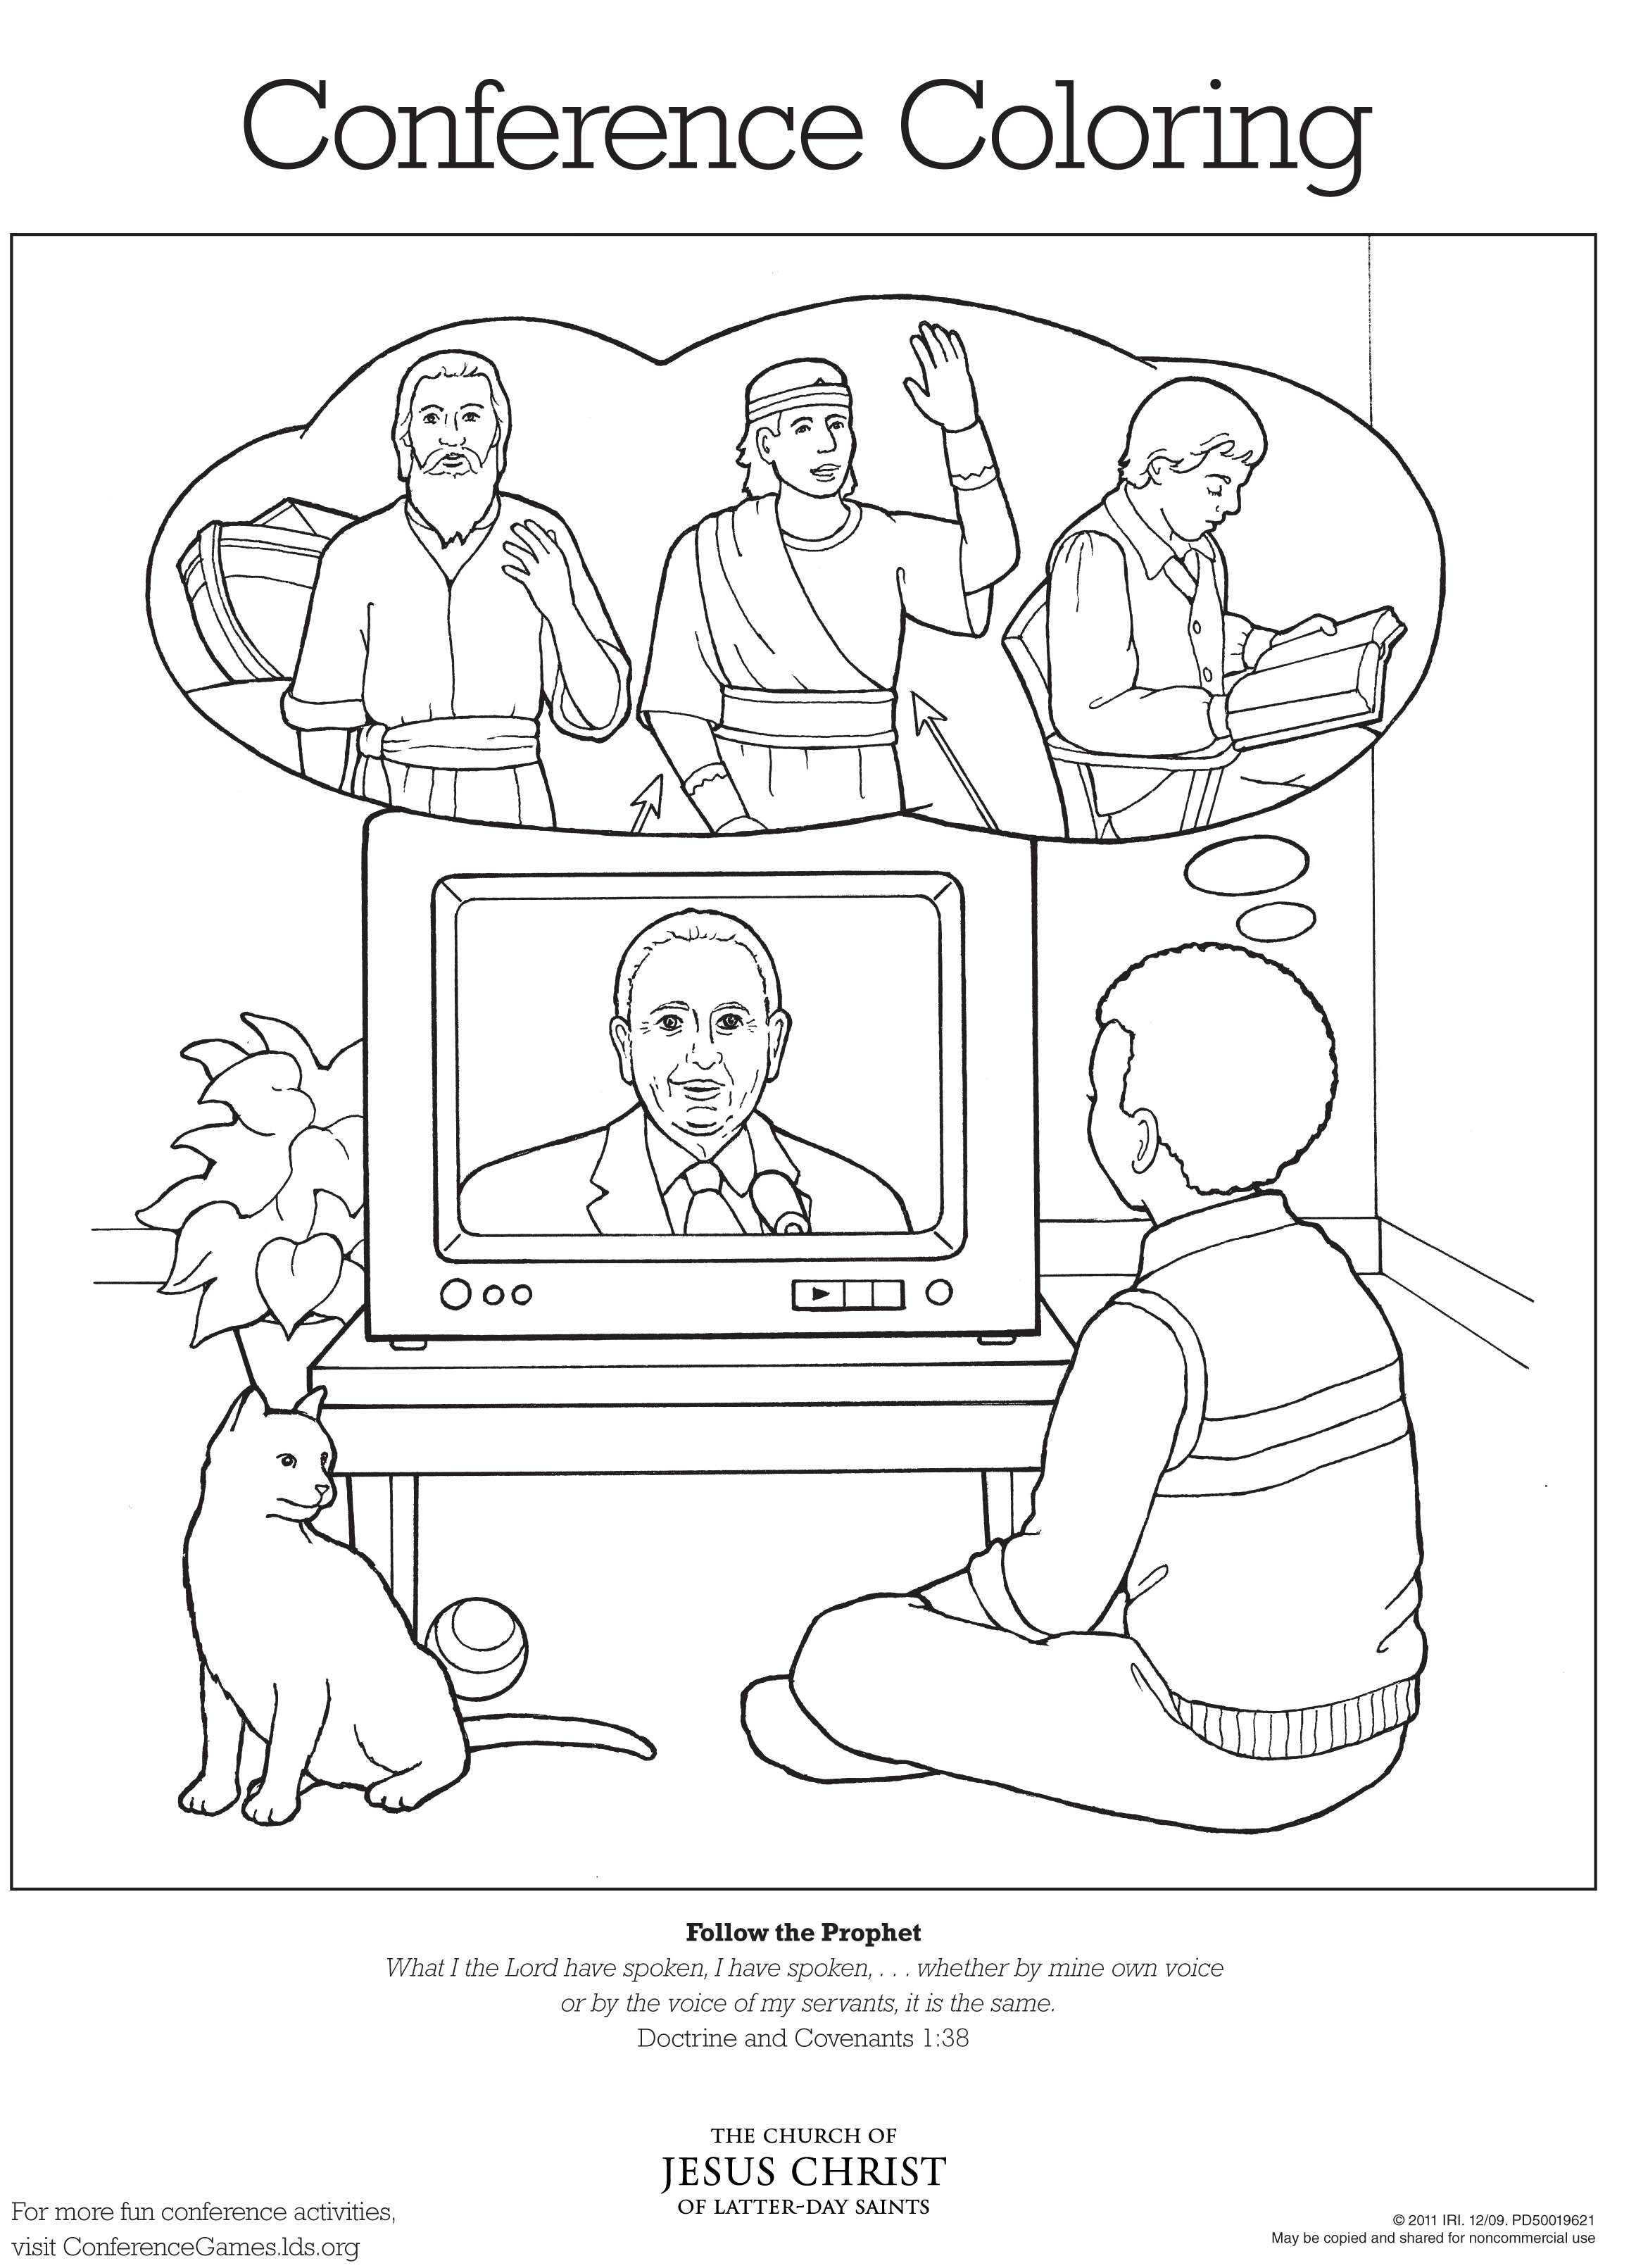 Lds coloring pages to download and print for free